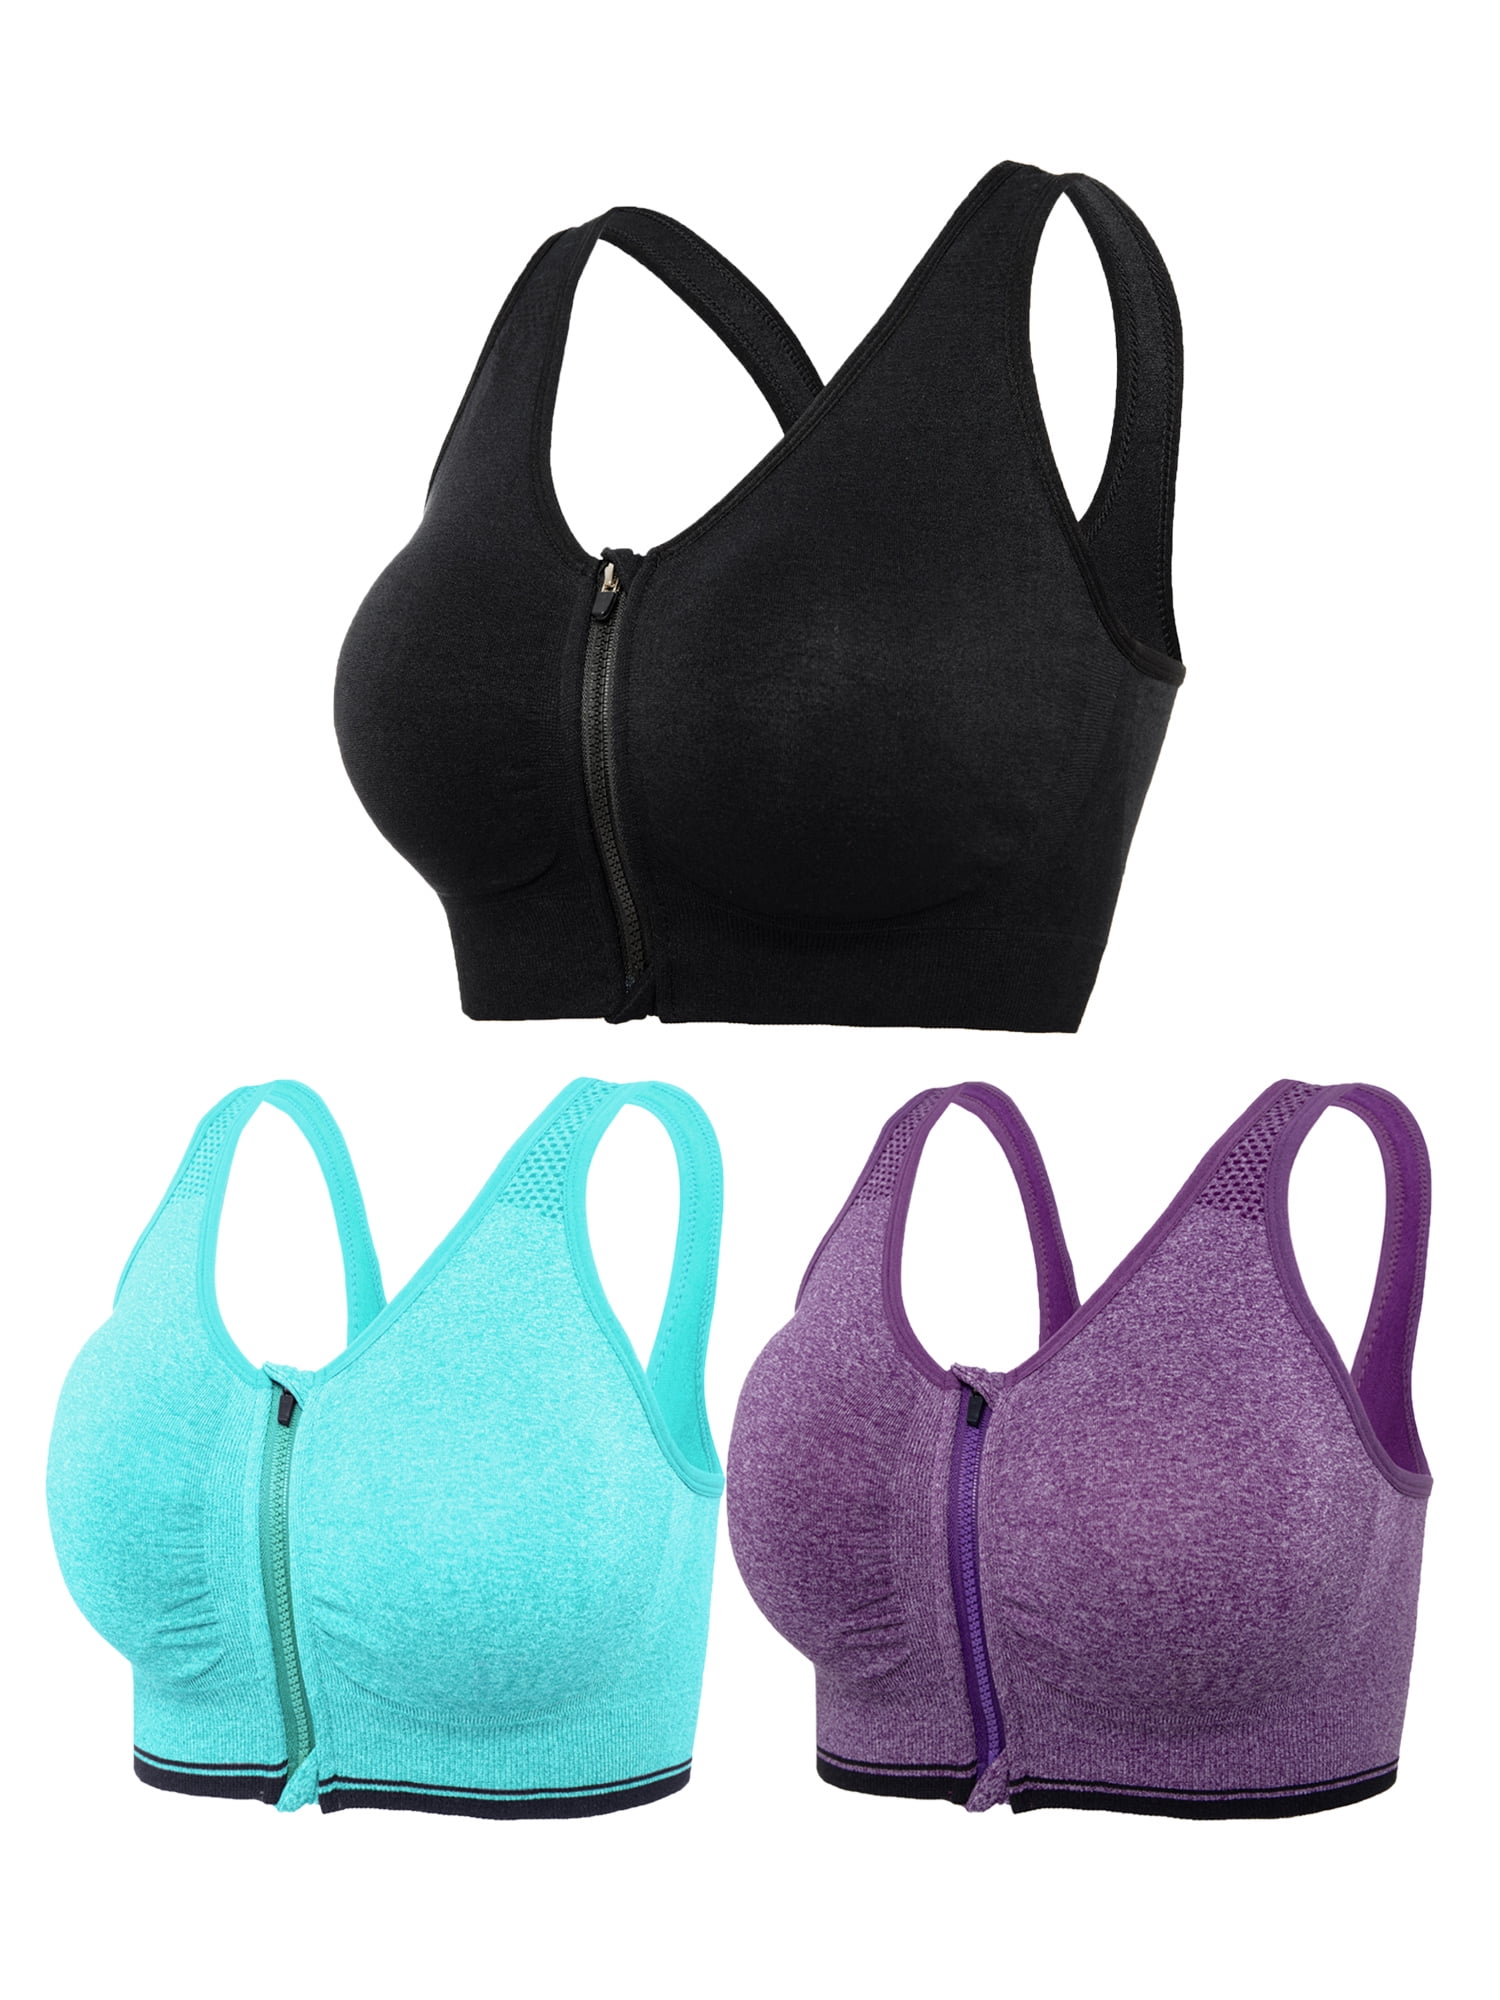 FANNYC 3 Pack Seamless Comfortable Sports Bra For Women Back Strappy  Longline Sports Bras Medium Support Yoga Workout Bra With Removable Pads 